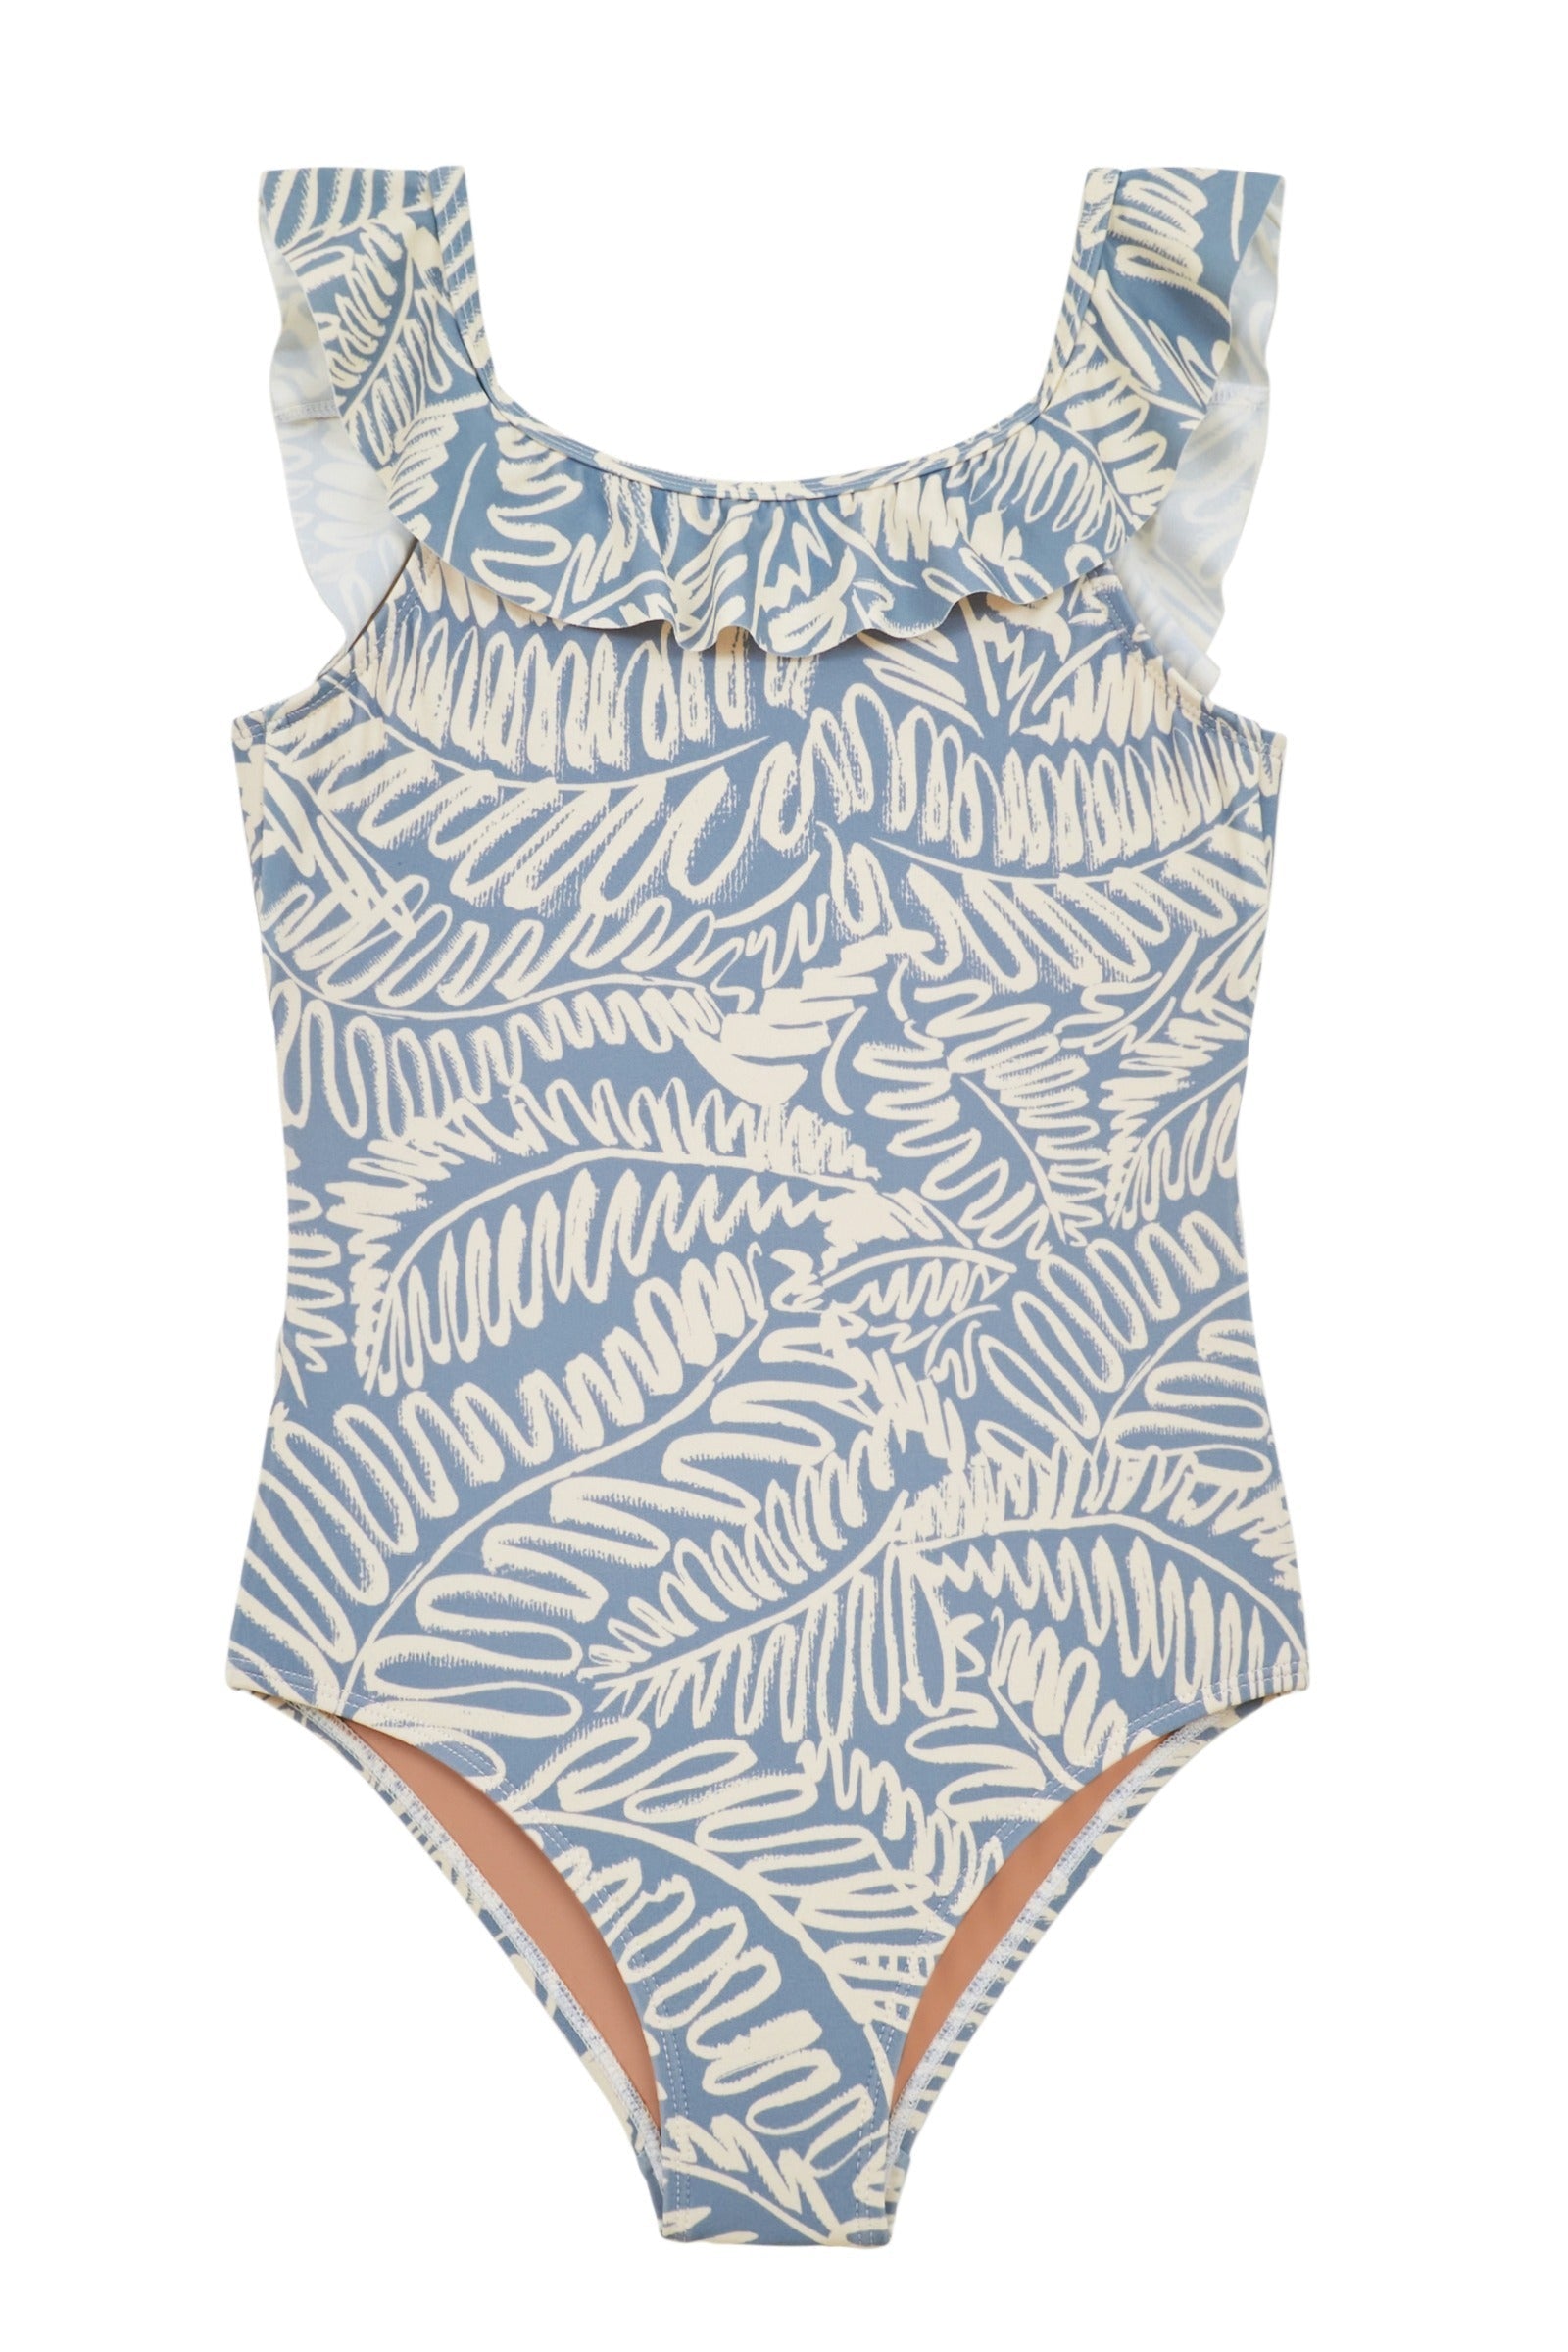 Little Sweet Pea One-Piece Swimsuit by Hermoza